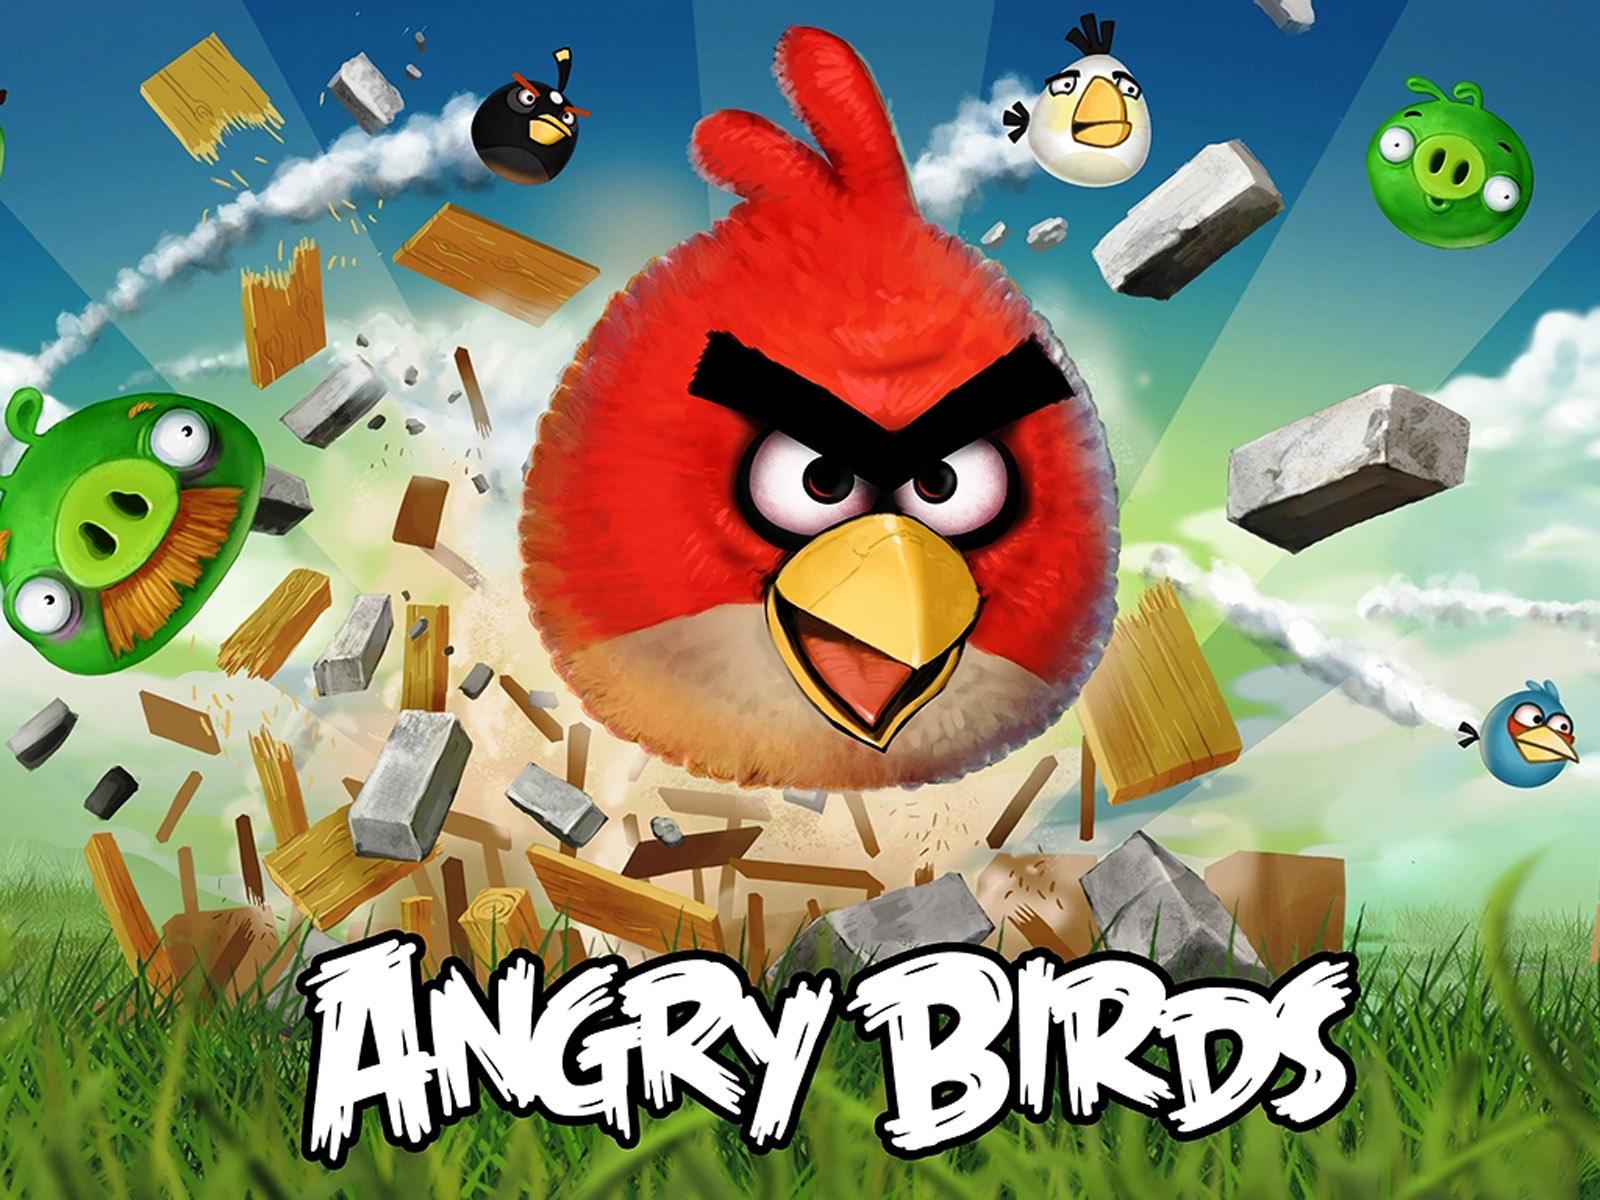 Angry Birds Wallpapers Desktop Game Pictures Download 1600x1200